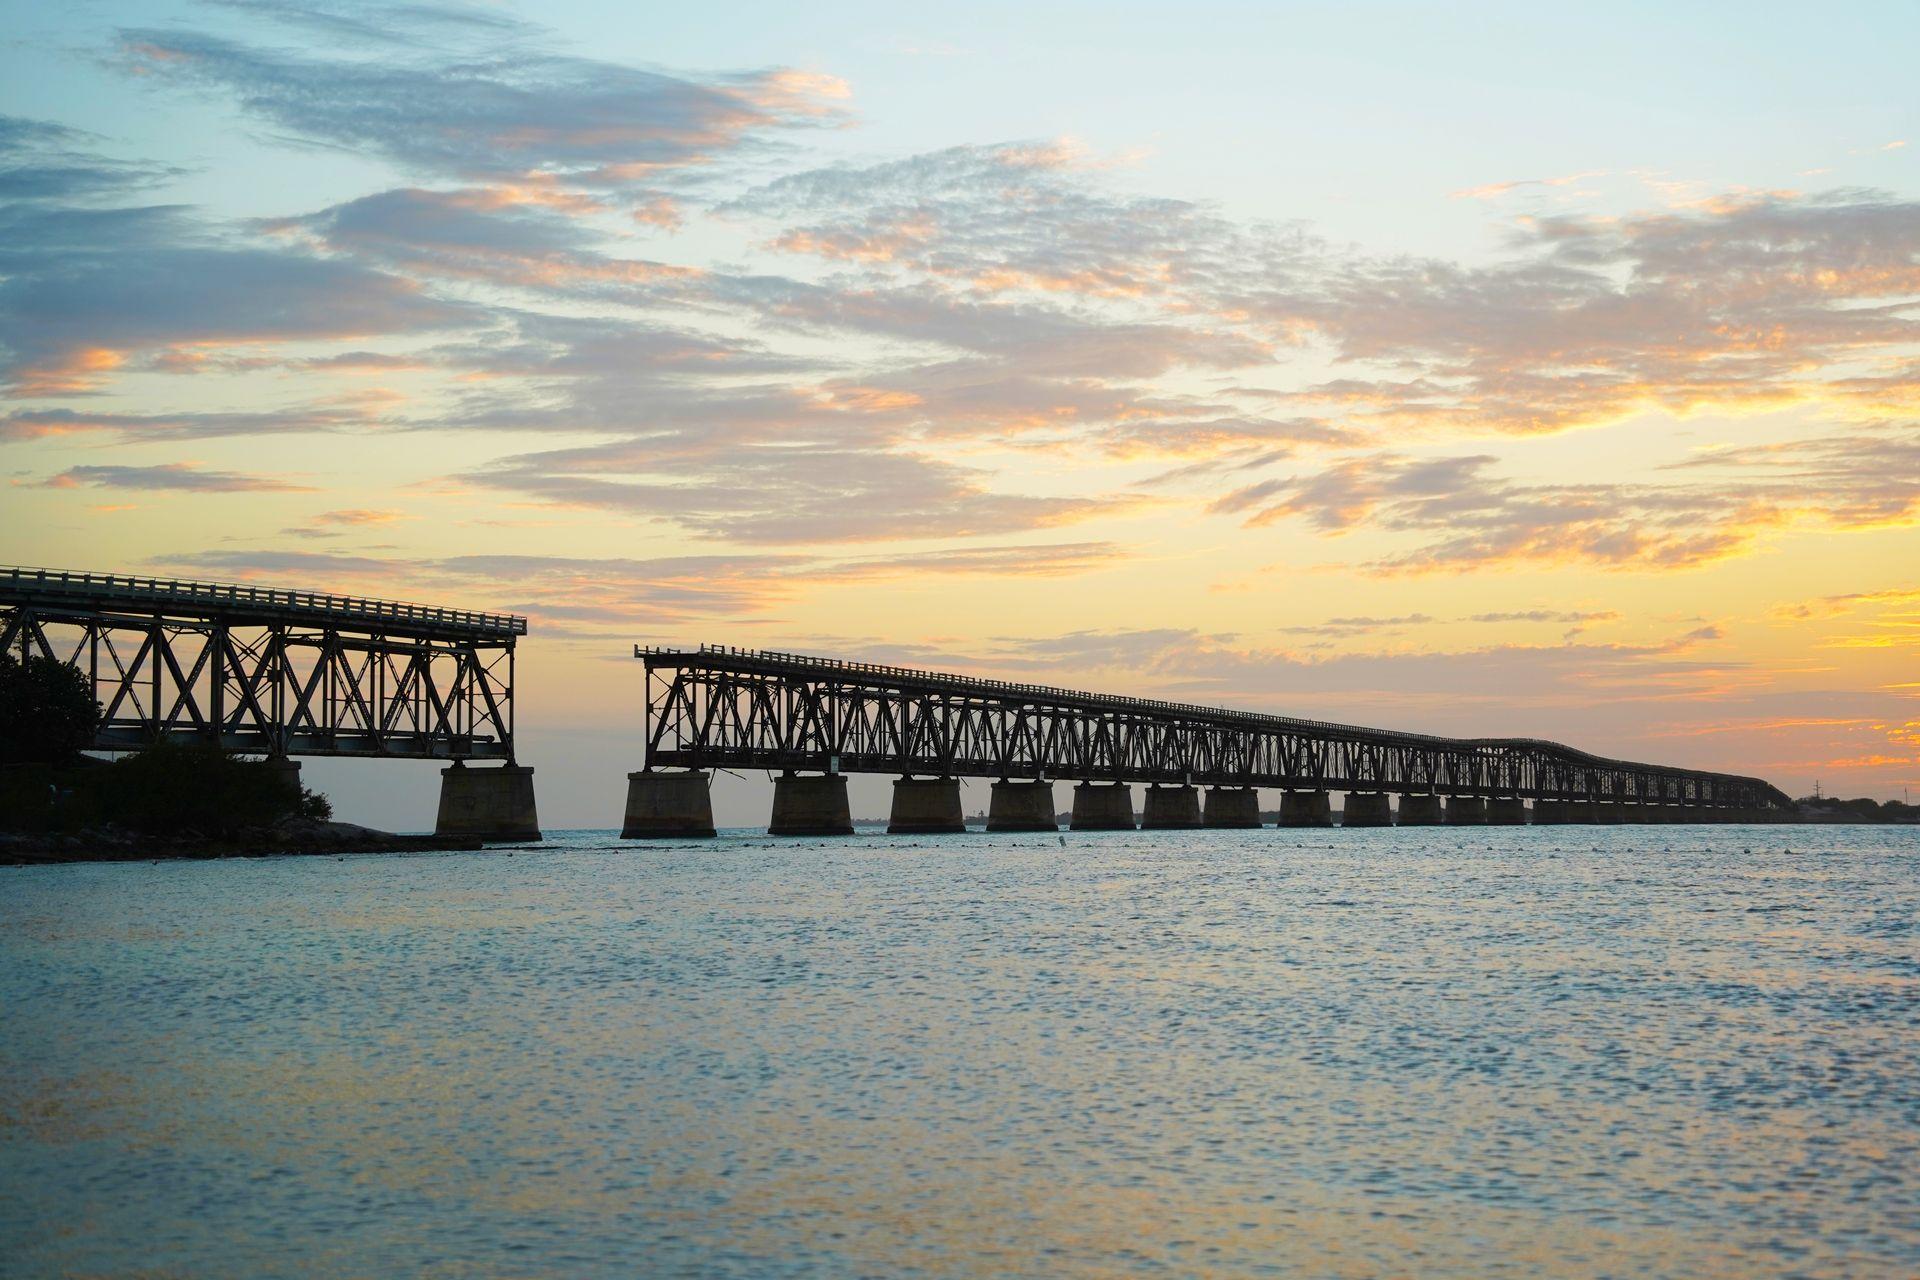 The sunset over the old Bahia Honda train bridge with the ocean in the foreground